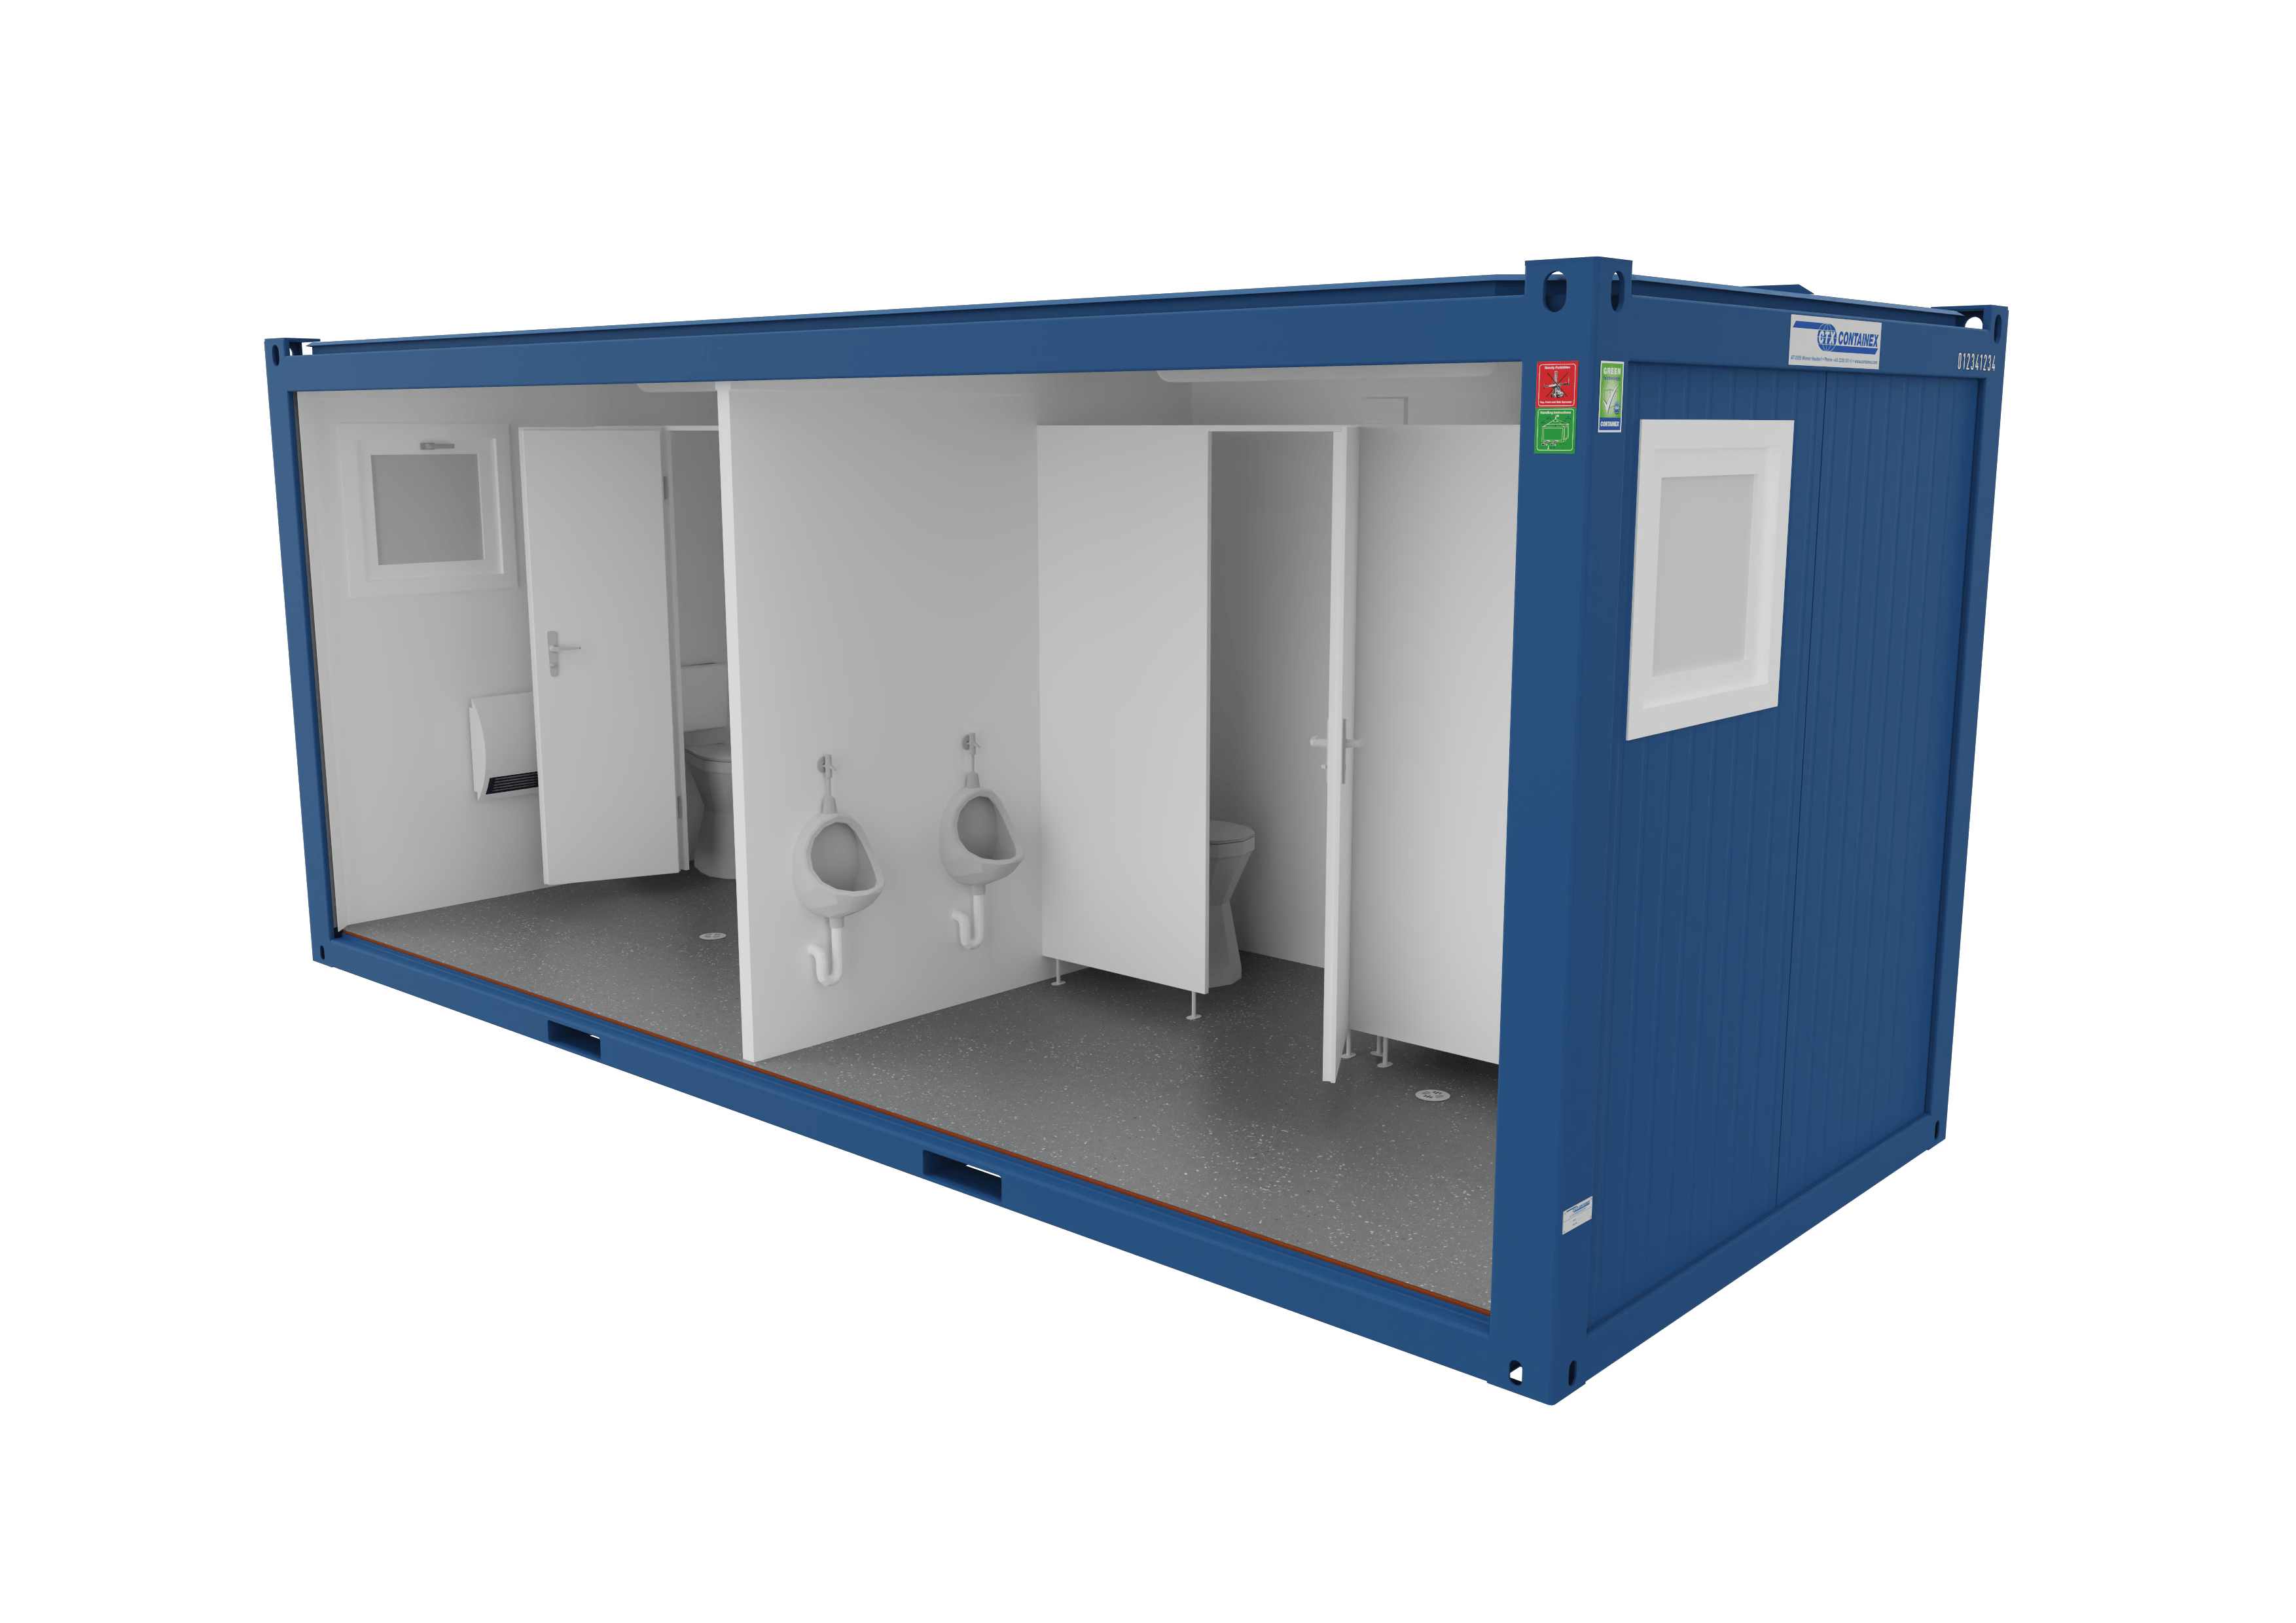 20' Wc-container